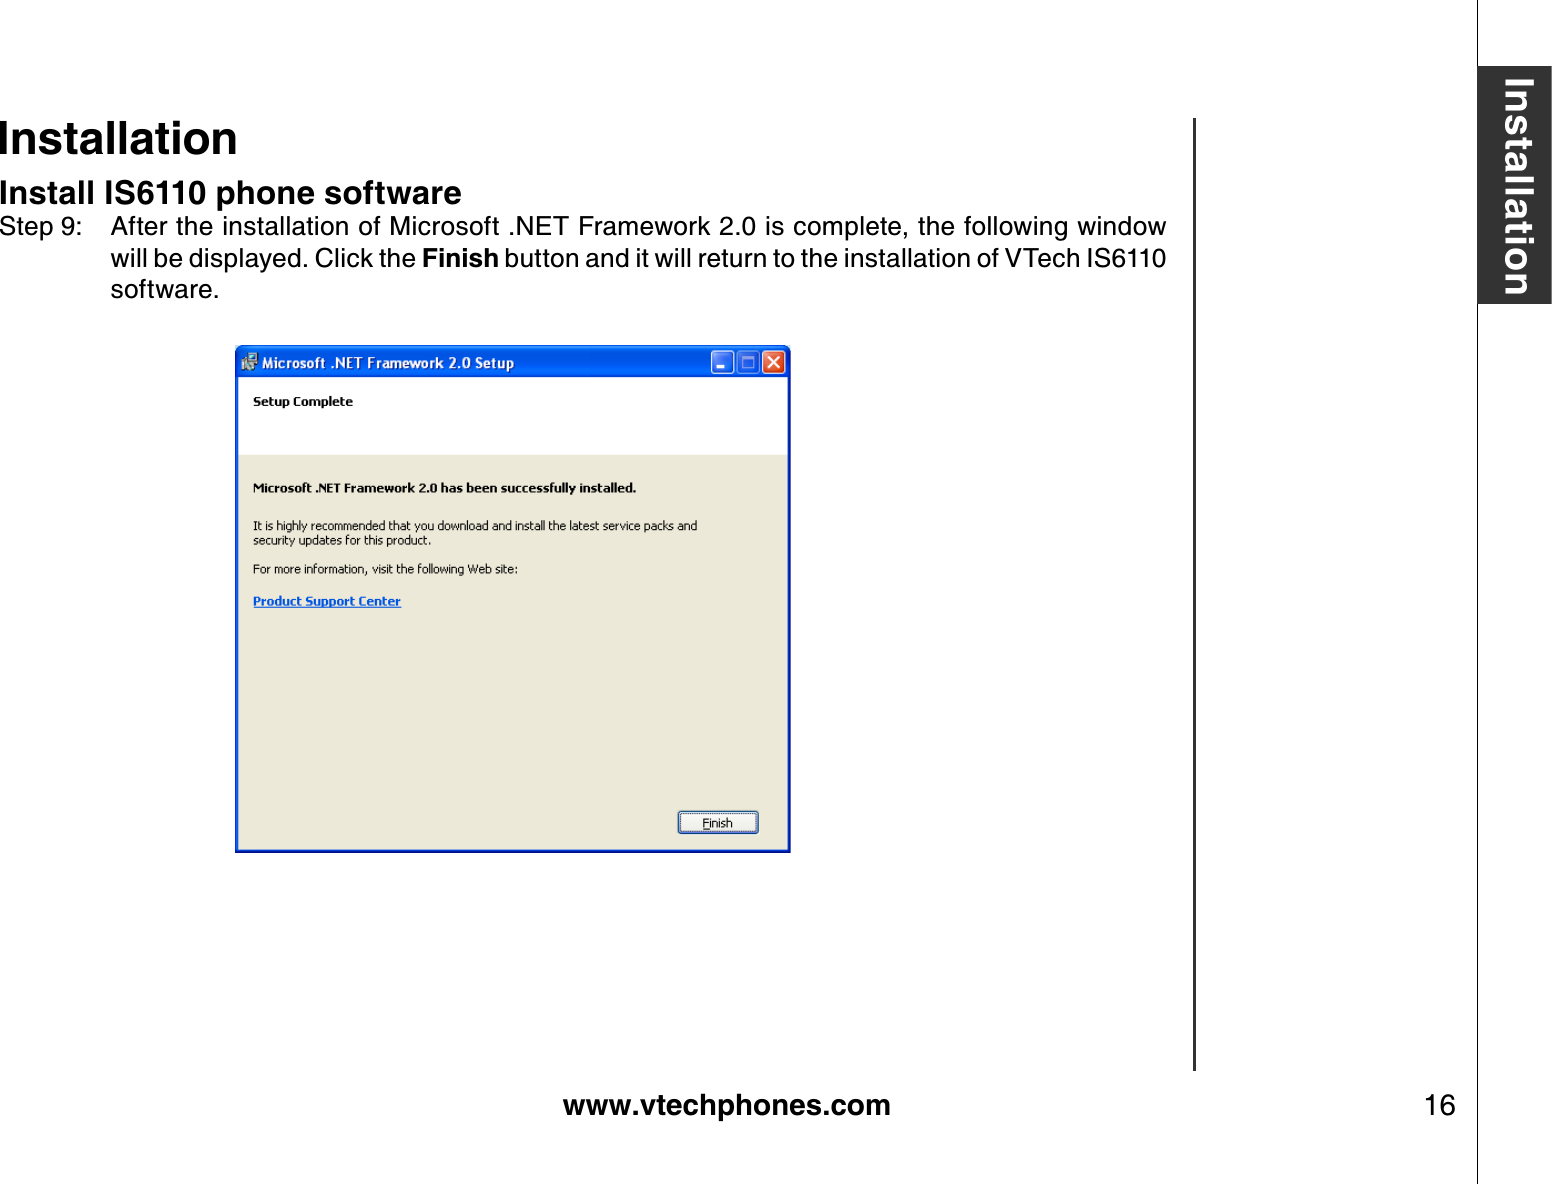 www.vtechphones.com 16InstallationInstallationInstall IS6110 phone softwareStep 9: After the installation of Microsoft .NET Framework 2.0 is complete, the following window will be displayed. Click the Finish button and it will return to the installation of VTech IS6110 software.             